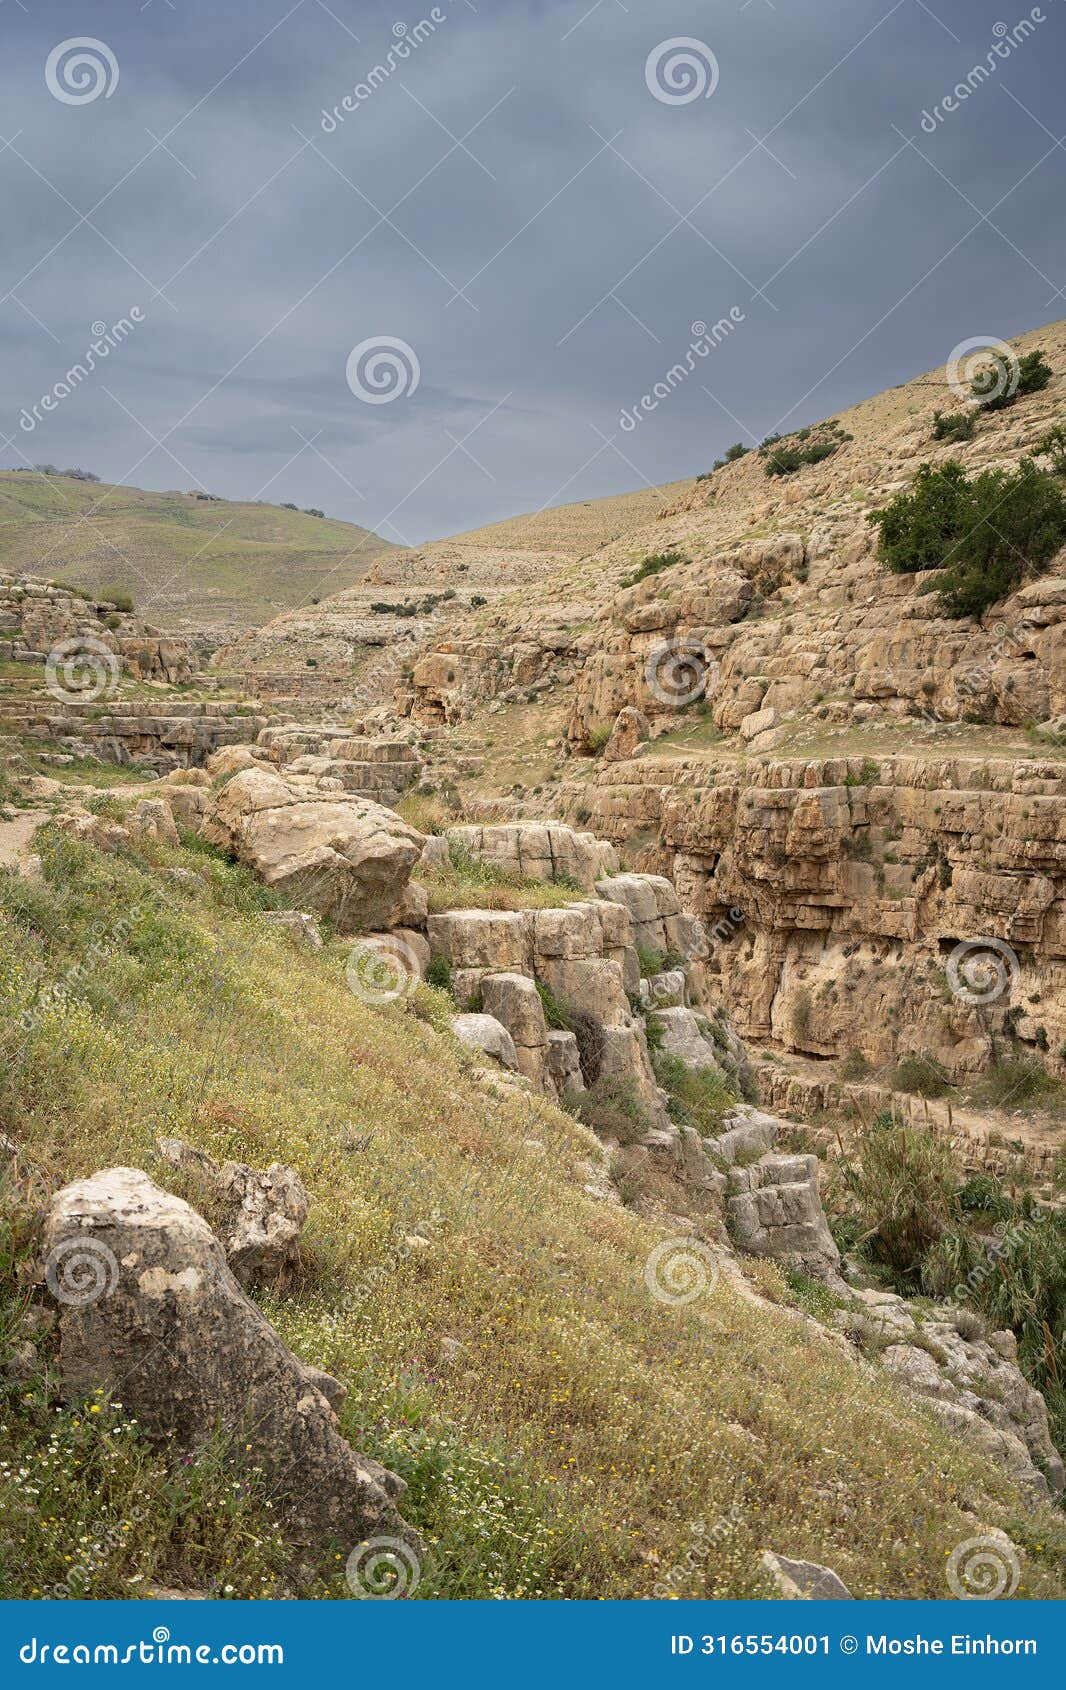 a landscape on the bank of the prat stream, israel